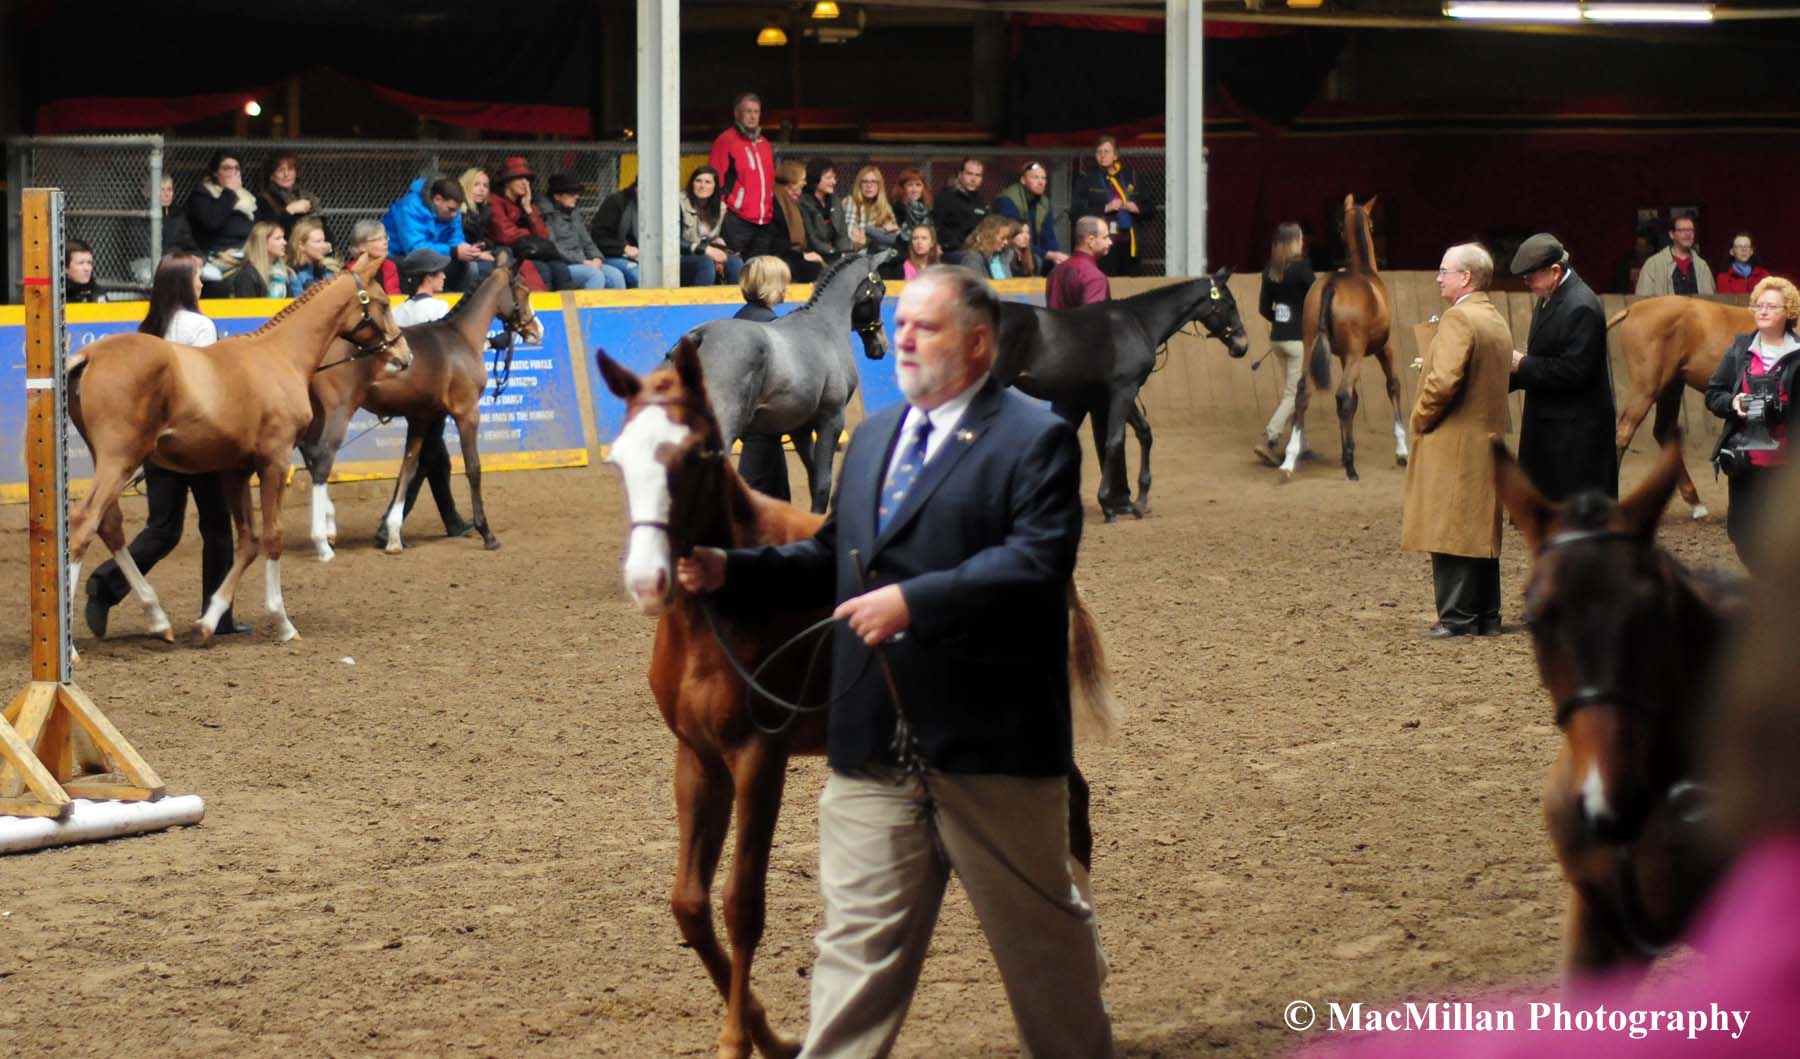 Photo 27 – Nineteen weanlings competed in the $5,000 Canadian Sport Horse President's Cup - Colt, Gelding or Filly 2015 class in the Horse Palace ring on the final Saturday of the 2015 Royal Horse Show. The winner was BF Lennyx owned and shown by Garry Roque. Photo by Kim MacMillan/MacMillan Photography